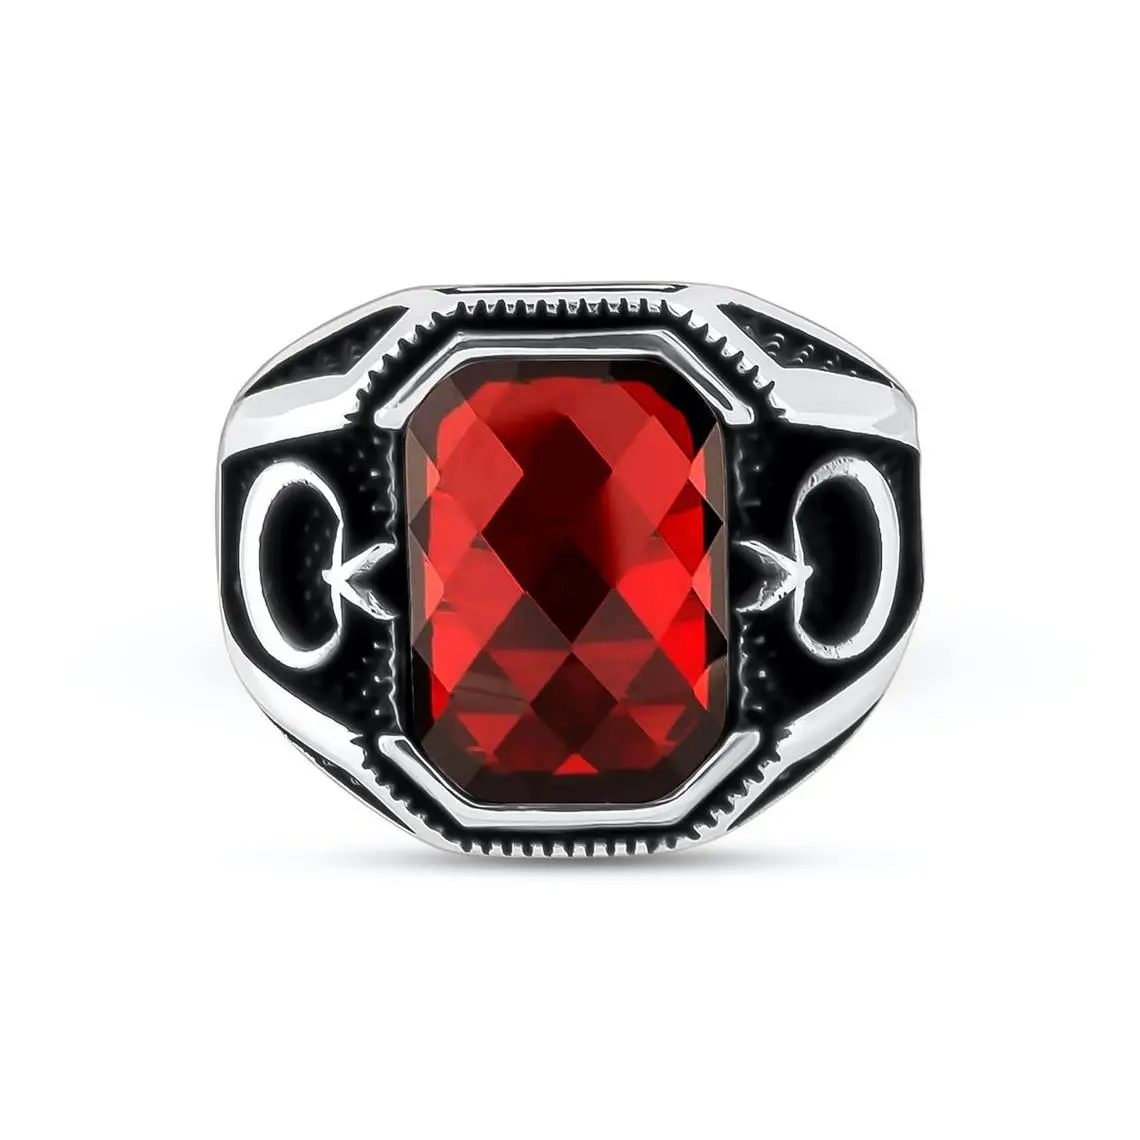 

Silver Oval Faceted Red Zircon Gemstone Ring, Turkish Men Jewelry, Moon Star Motif Ring 925 Sterling Silver Collocation Fashion